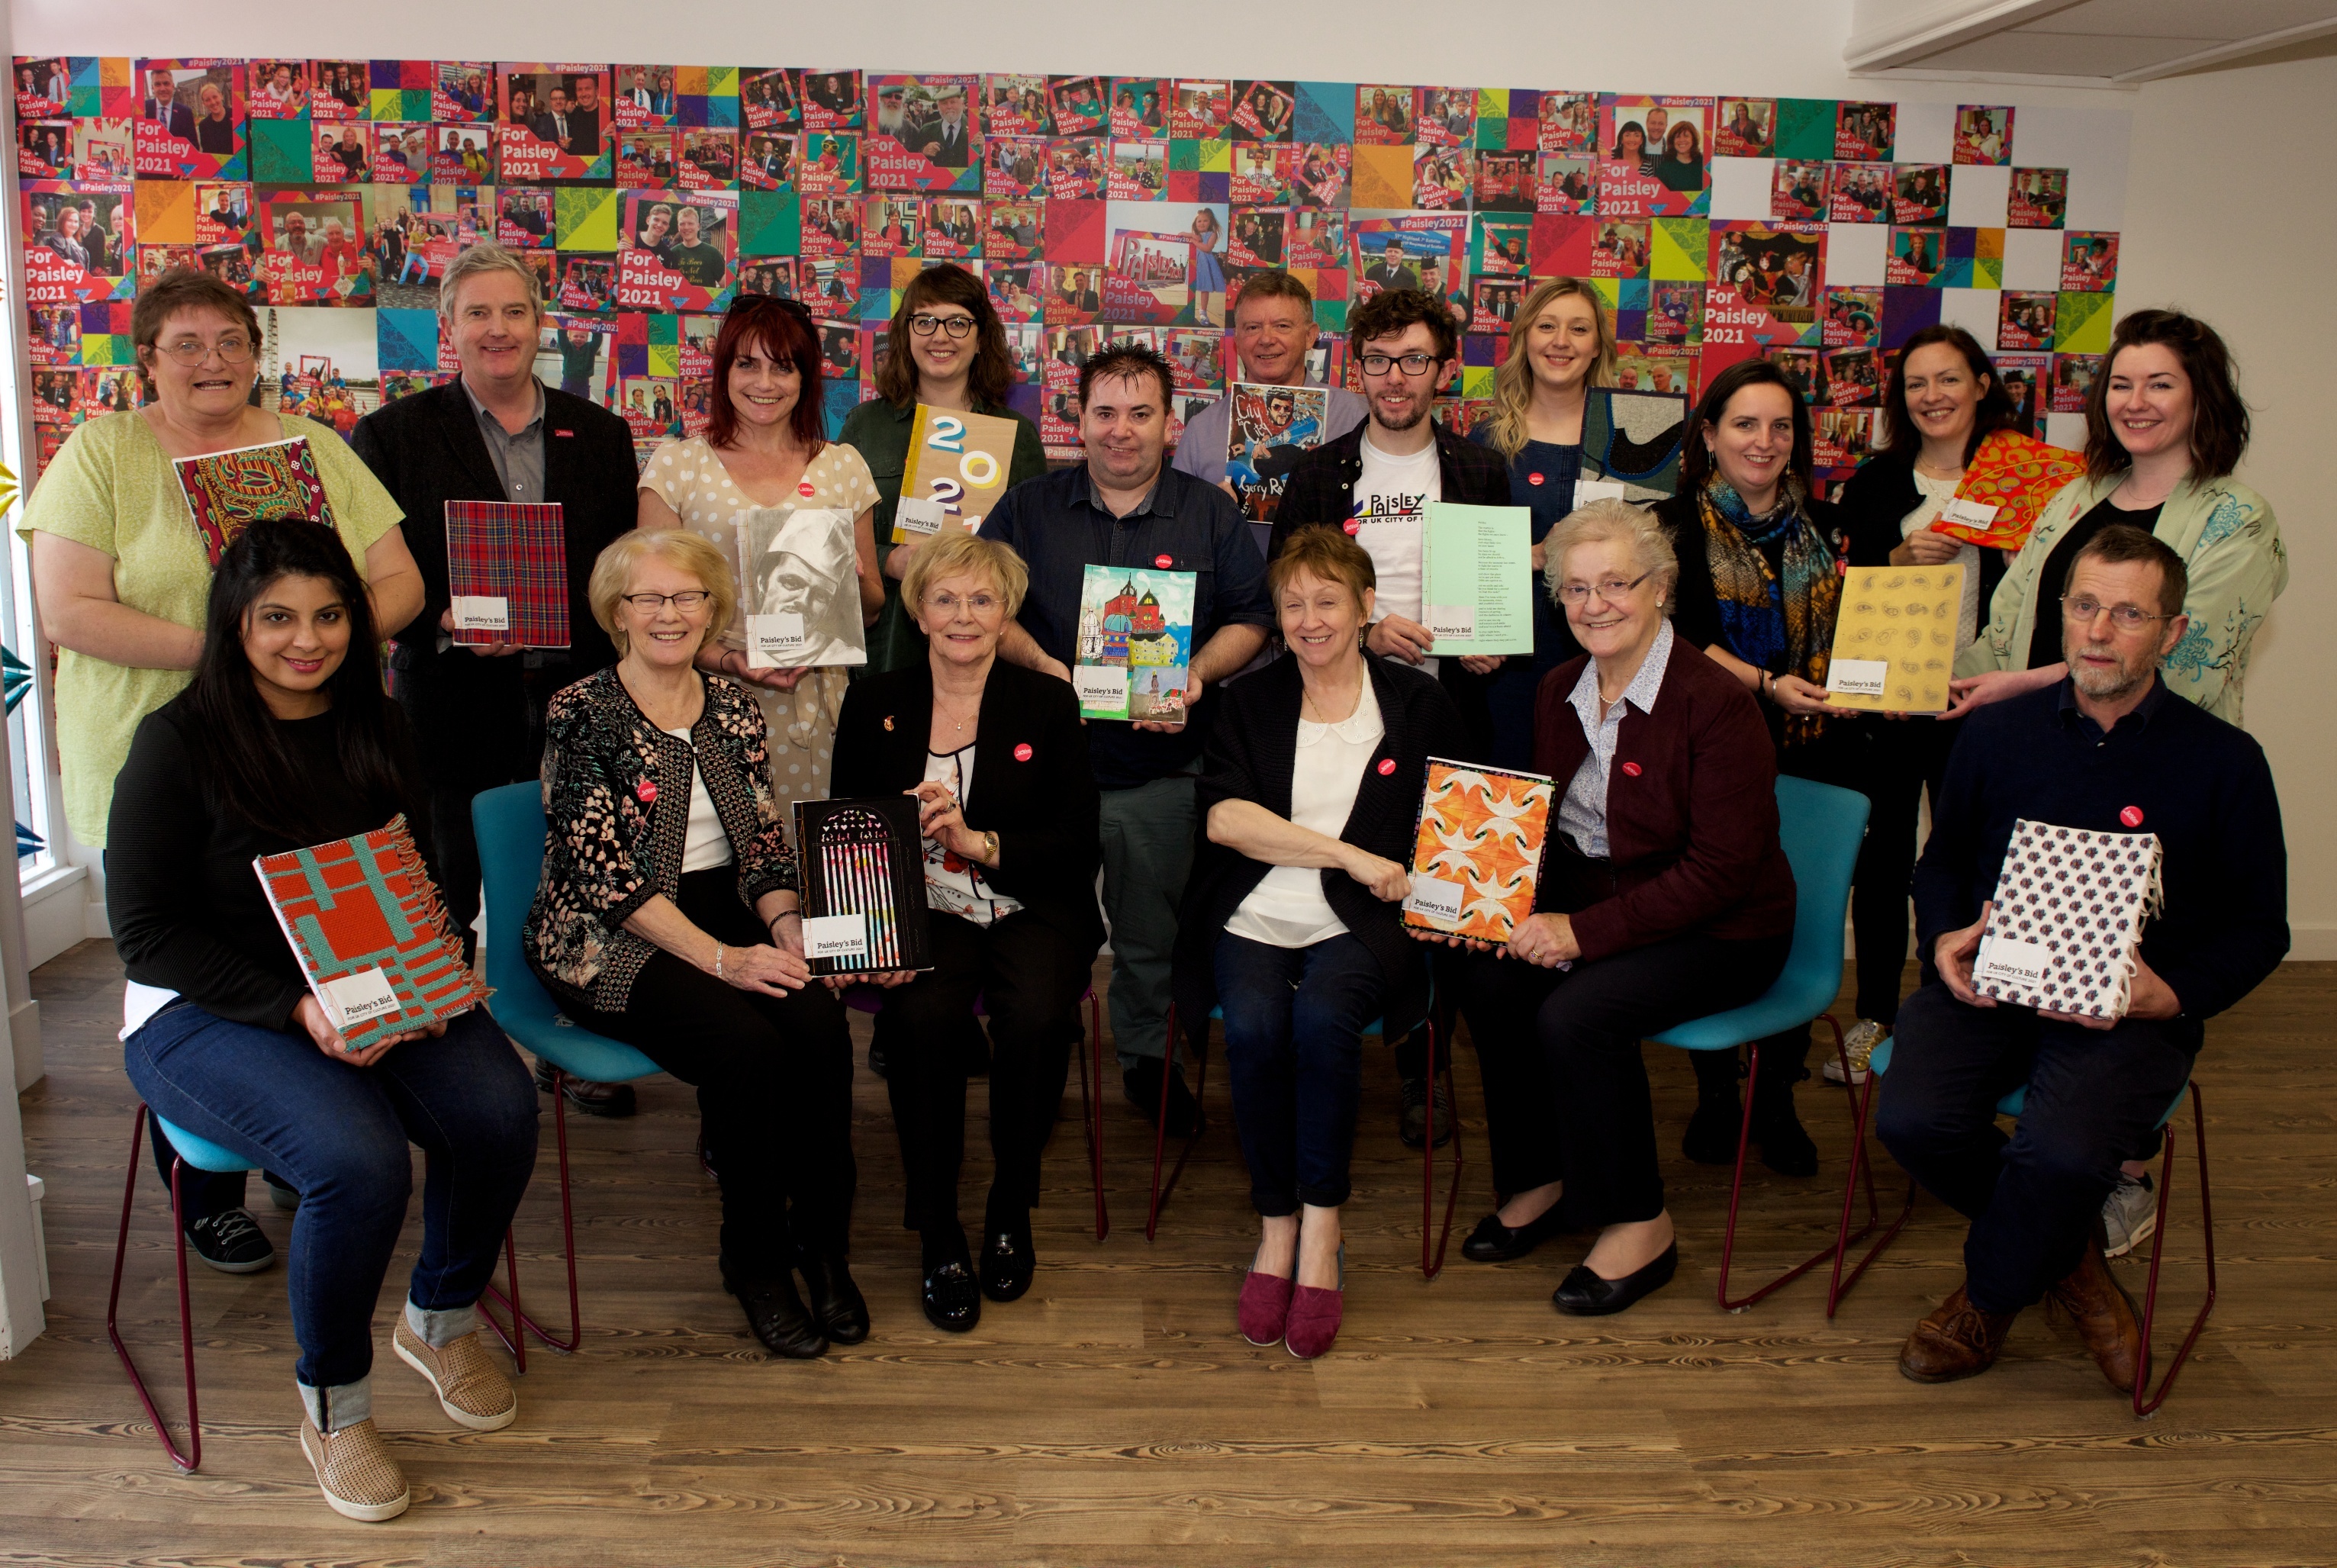 Paisley 2021 bid artists and book covers